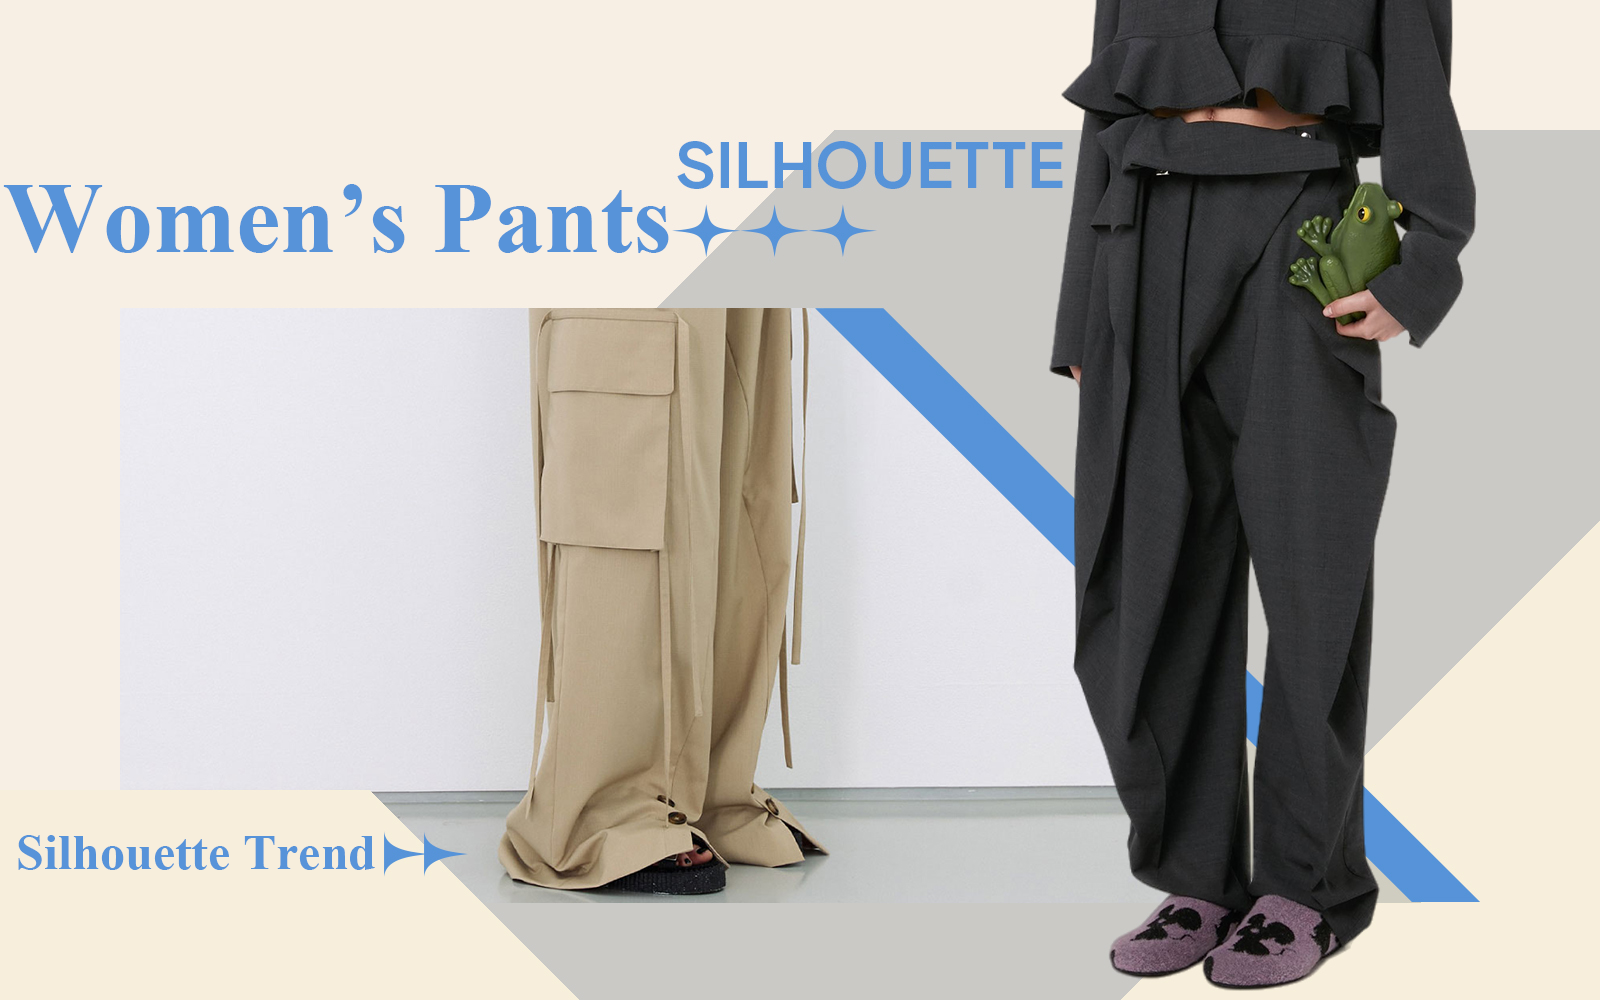 High Street Fashion -- The Silhouette Trend for Women's Pants